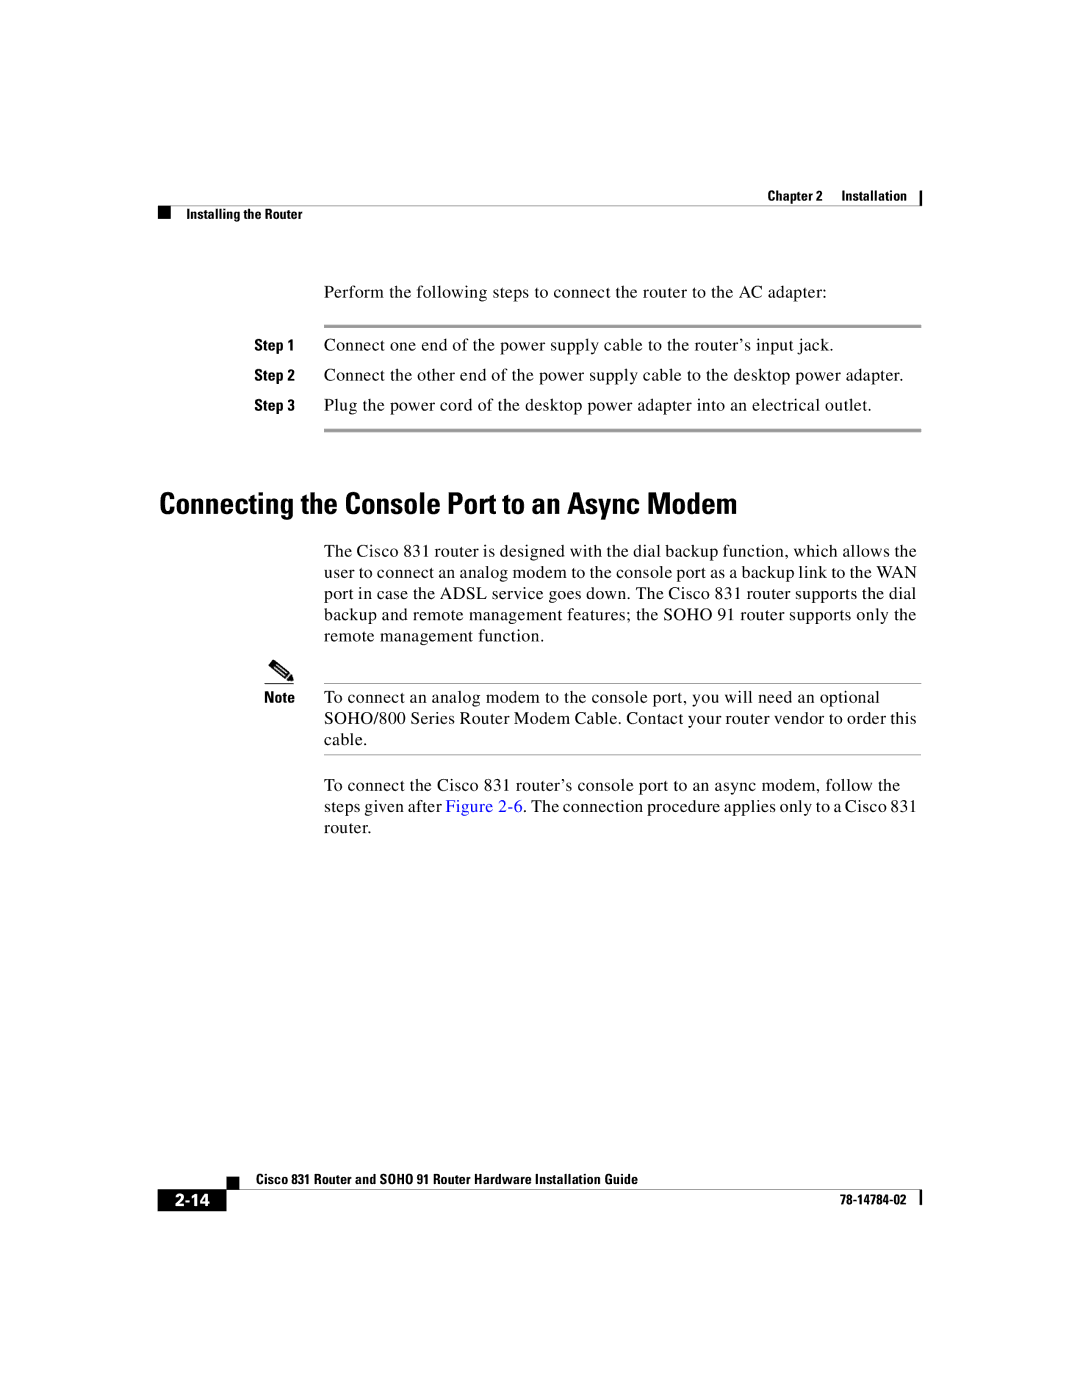 Cisco Systems Cisco 831 manual Connecting the Console Port to an Async Modem 